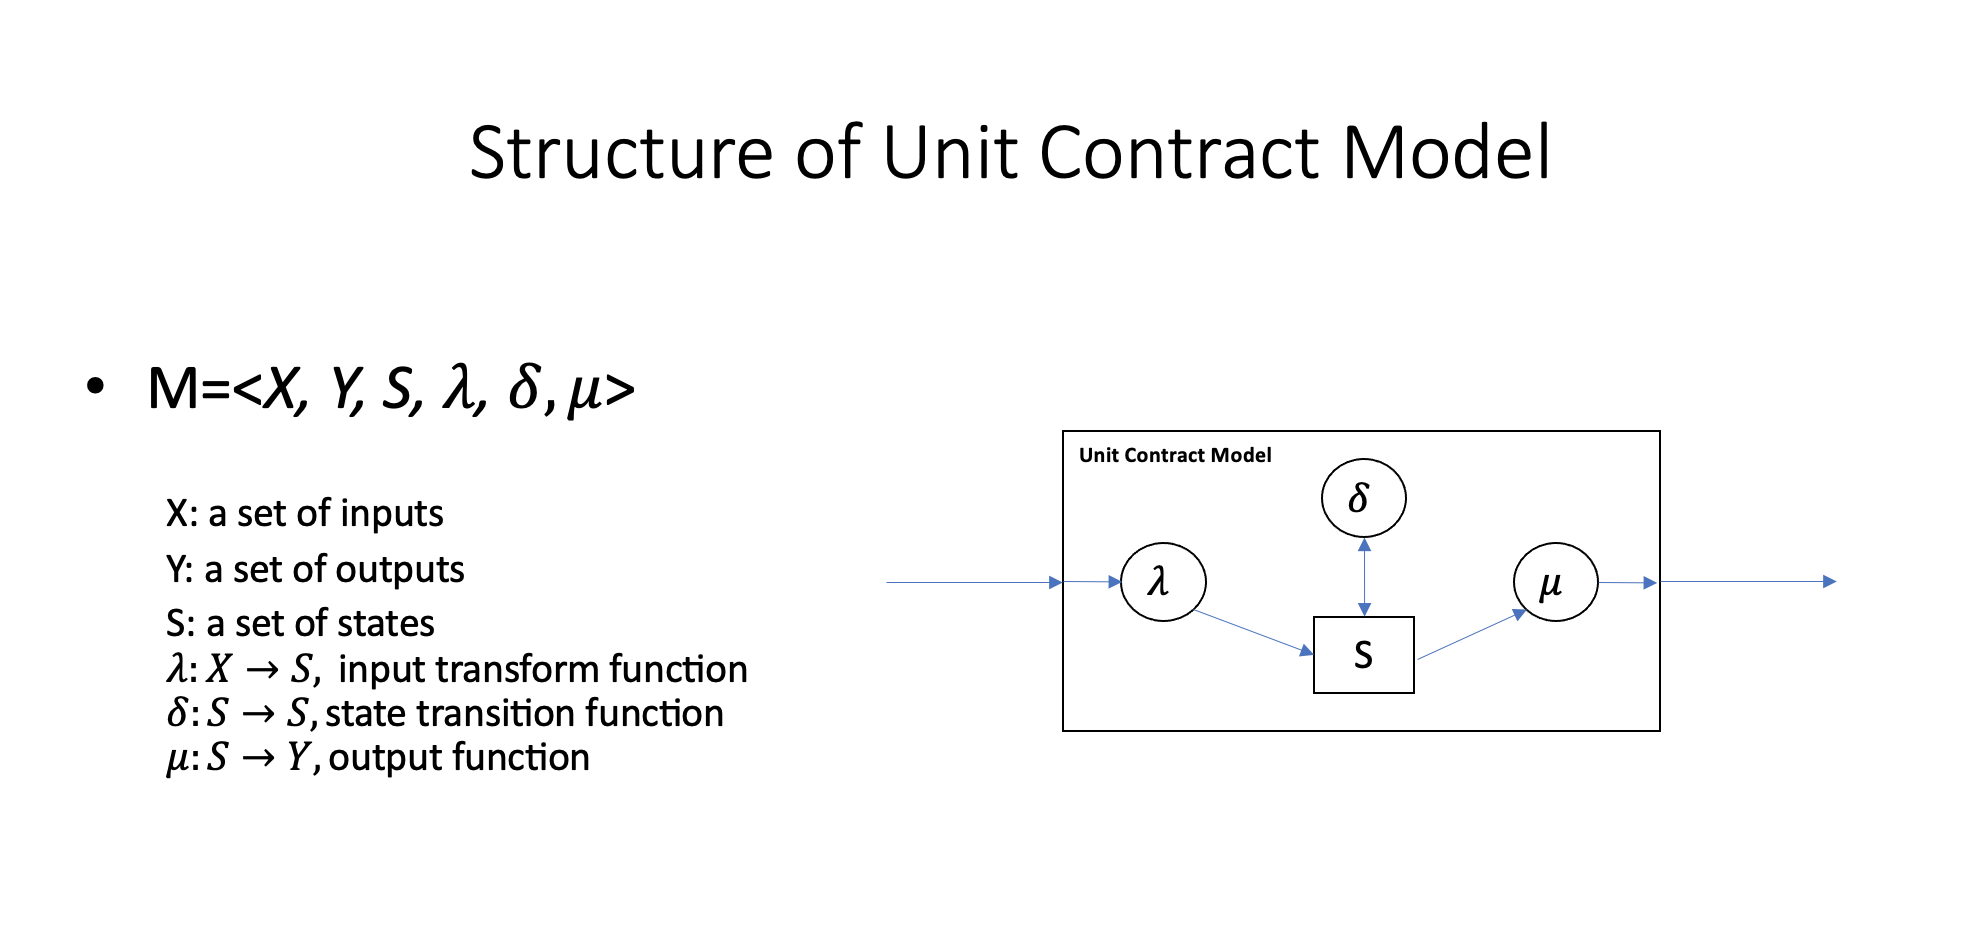 Protocon Announces 'Contract Model', an Alternative Technology to Smart Contracts 1